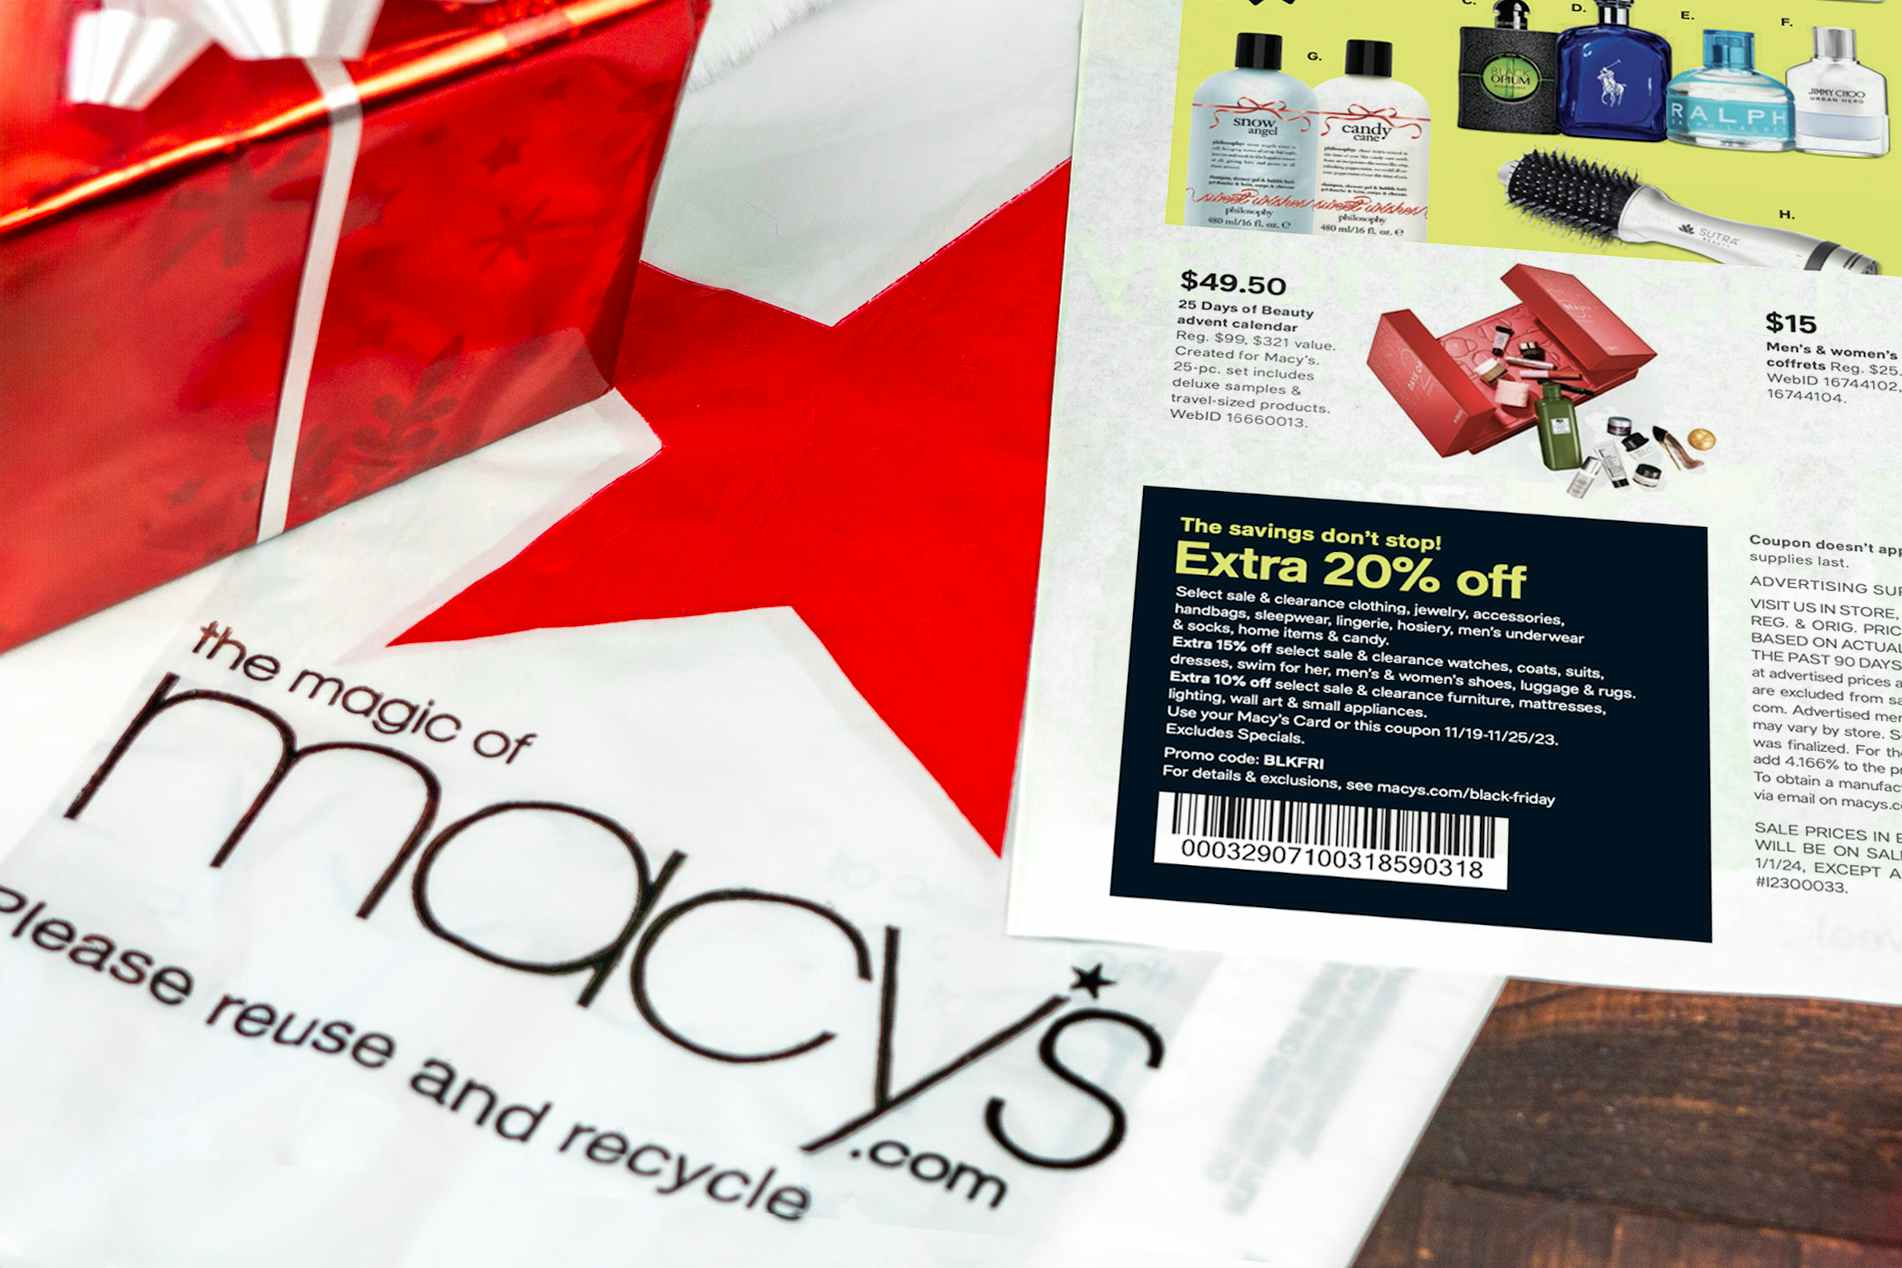 a 20% off macy's coupon on the Black Friday Ad